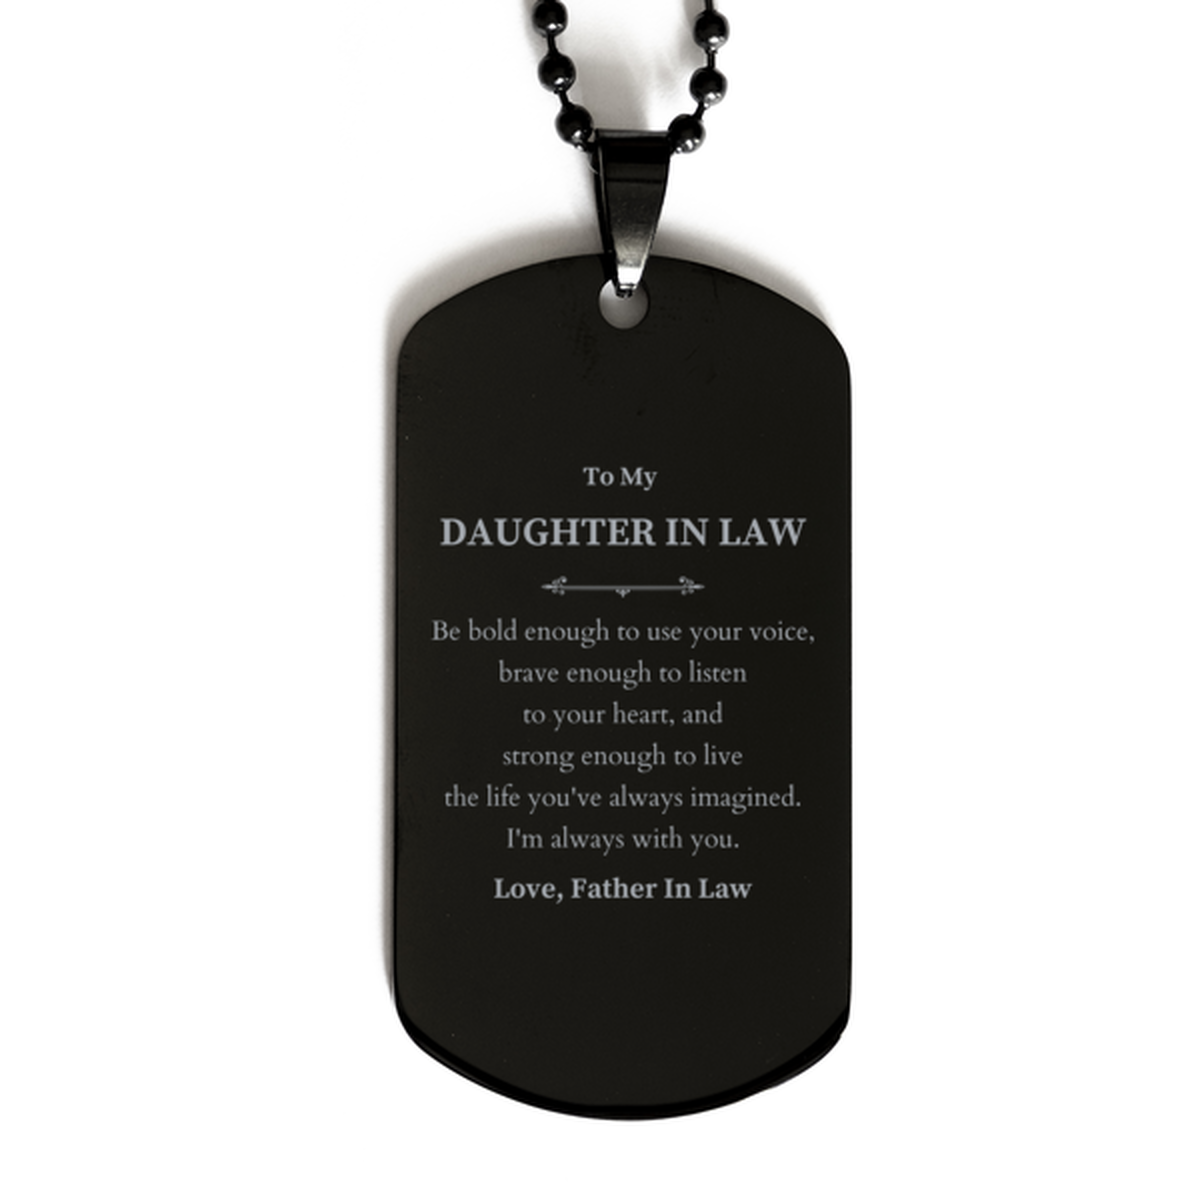 Keepsake Daughter In Law Black Dog Tag Gift Idea Graduation Christmas Birthday Daughter In Law from Father In Law, Daughter In Law Be bold enough to use your voice, brave enough to listen to your heart. Love, Father In Law